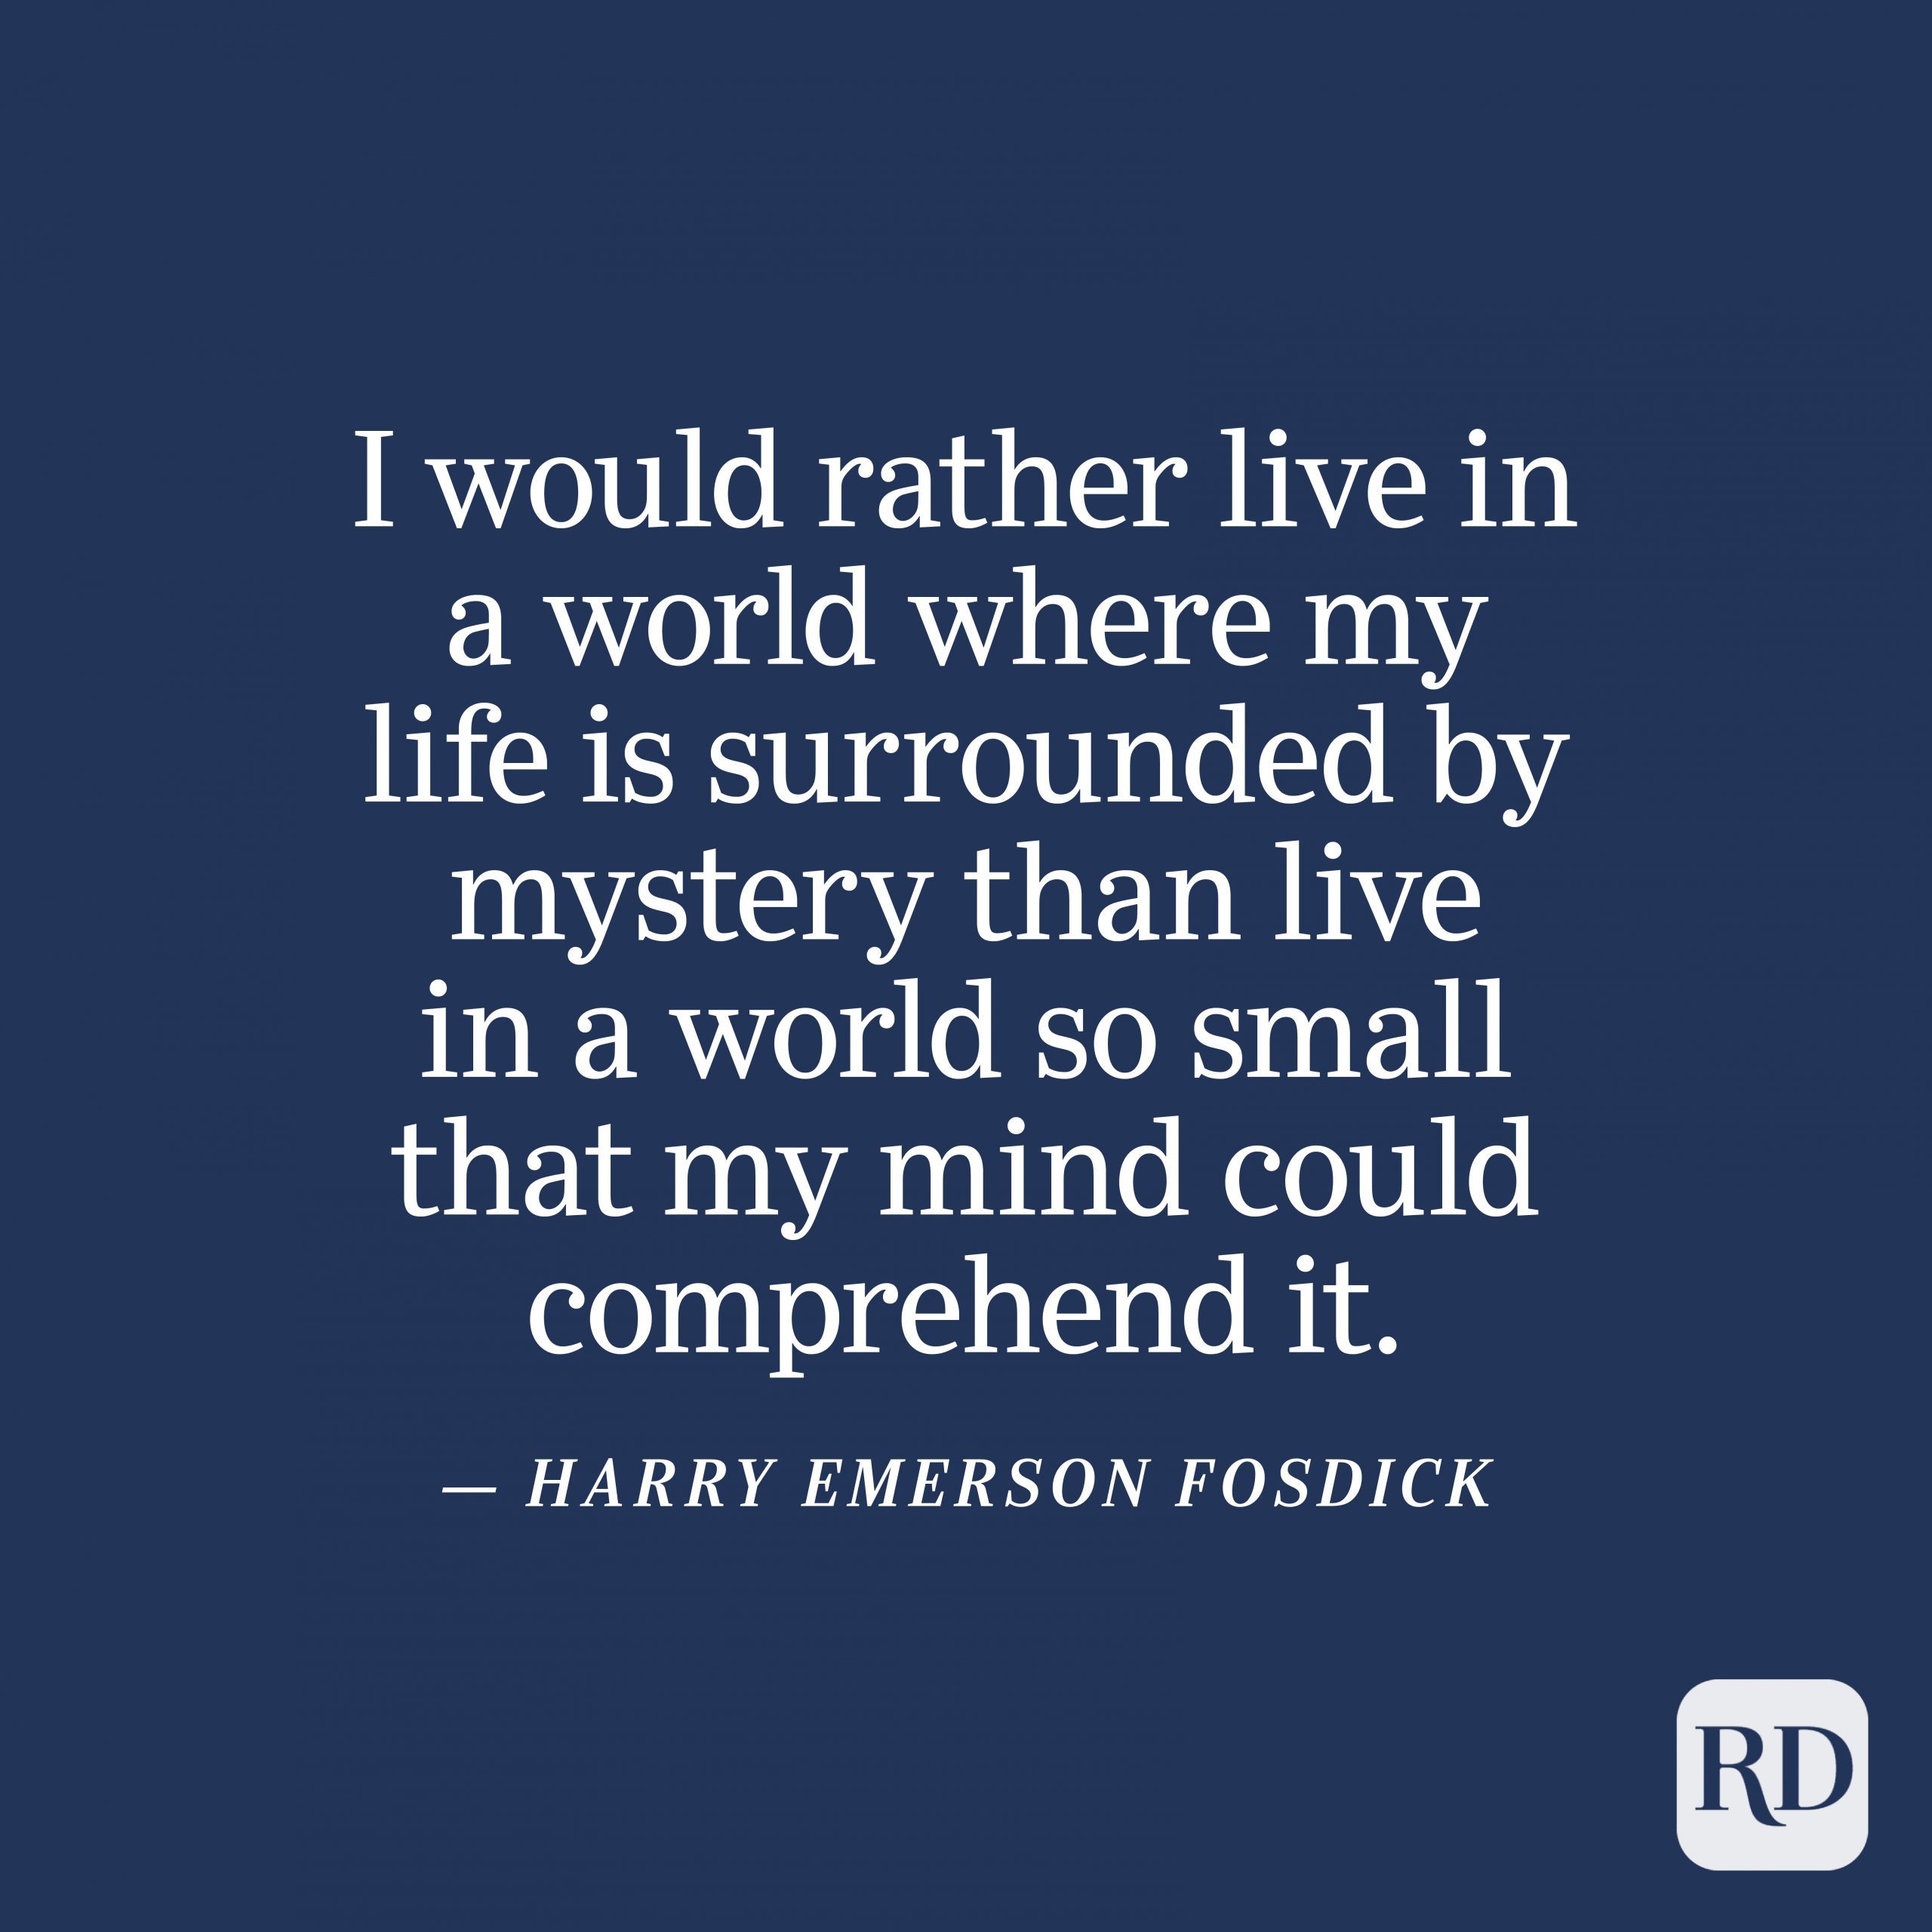 Harry Emerson Fosdick Uplifting Quote